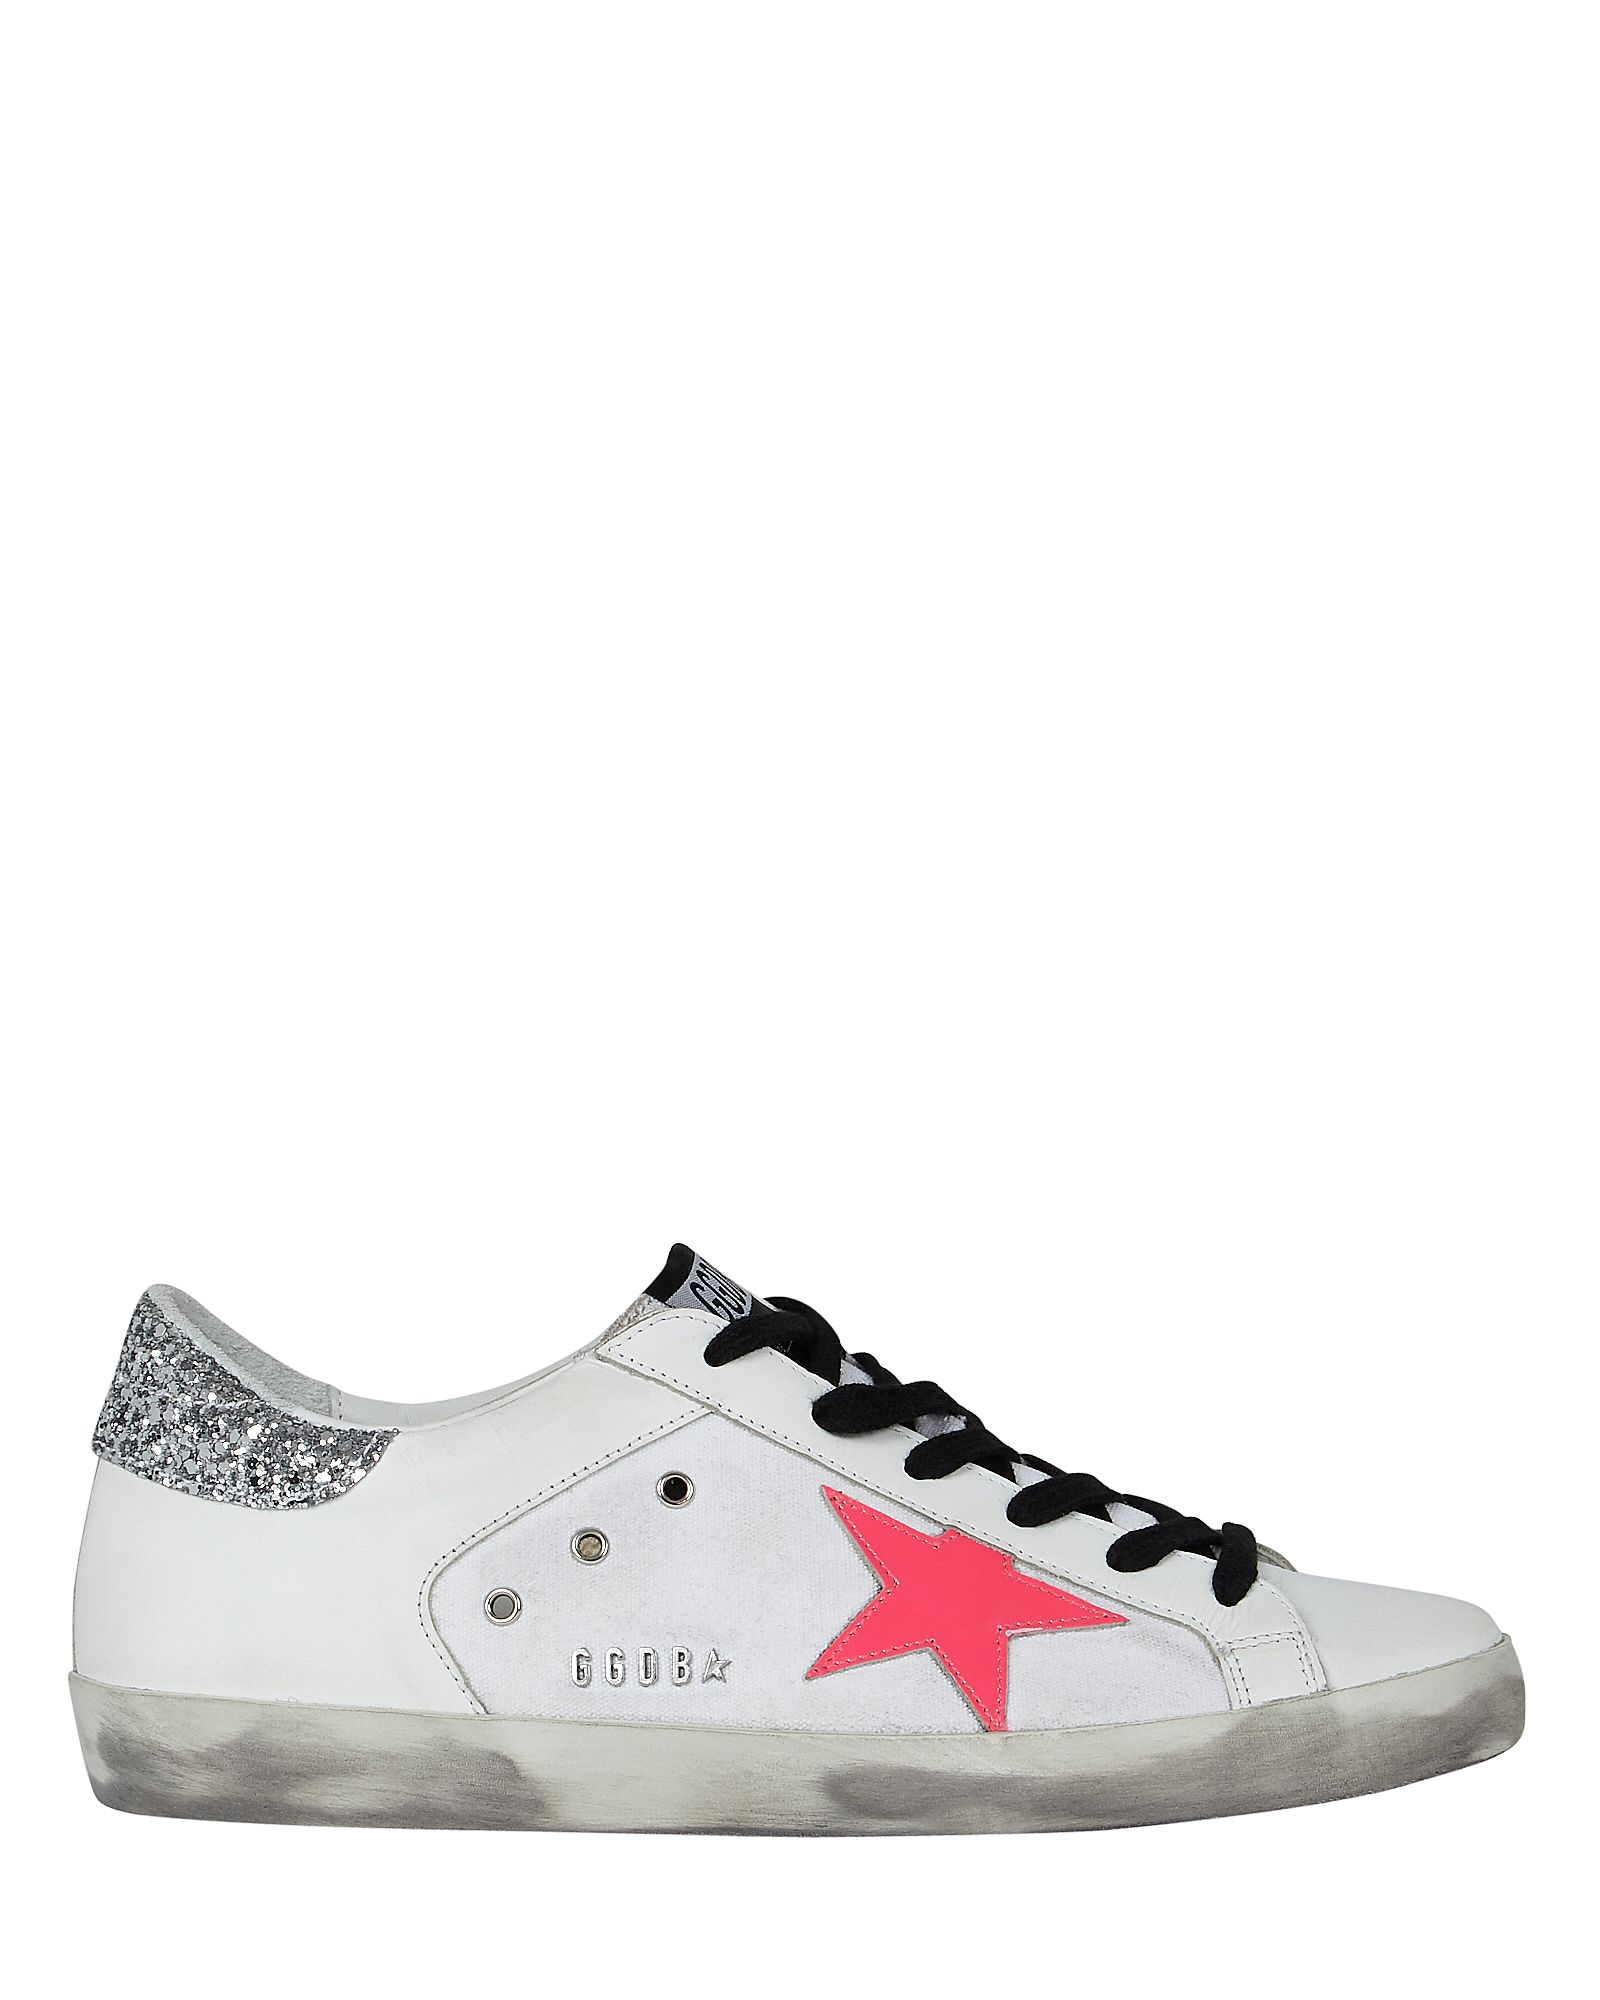 Golden Goose Superstar Low-Top Leather Sneakers, White 39 | INTERMIX